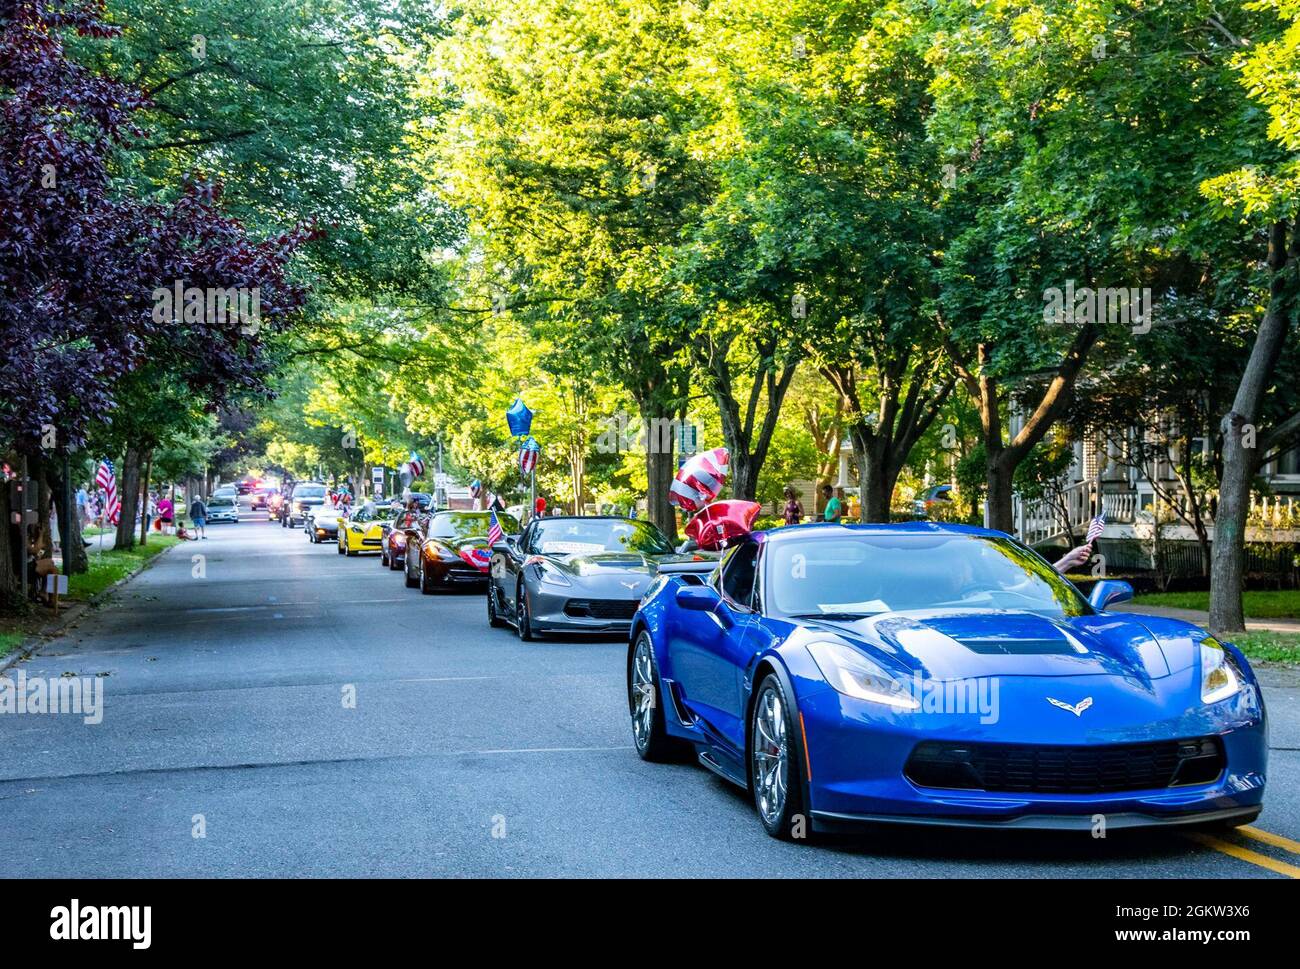 A line of Corvettes drive in the annual Fourth of July Celebration parade in Dover, Delaware, July 4, 2021. The celebration also included a reading of the Declaration of Independence, tours of the Old State House, musical entertainment and a fireworks display. Stock Photo